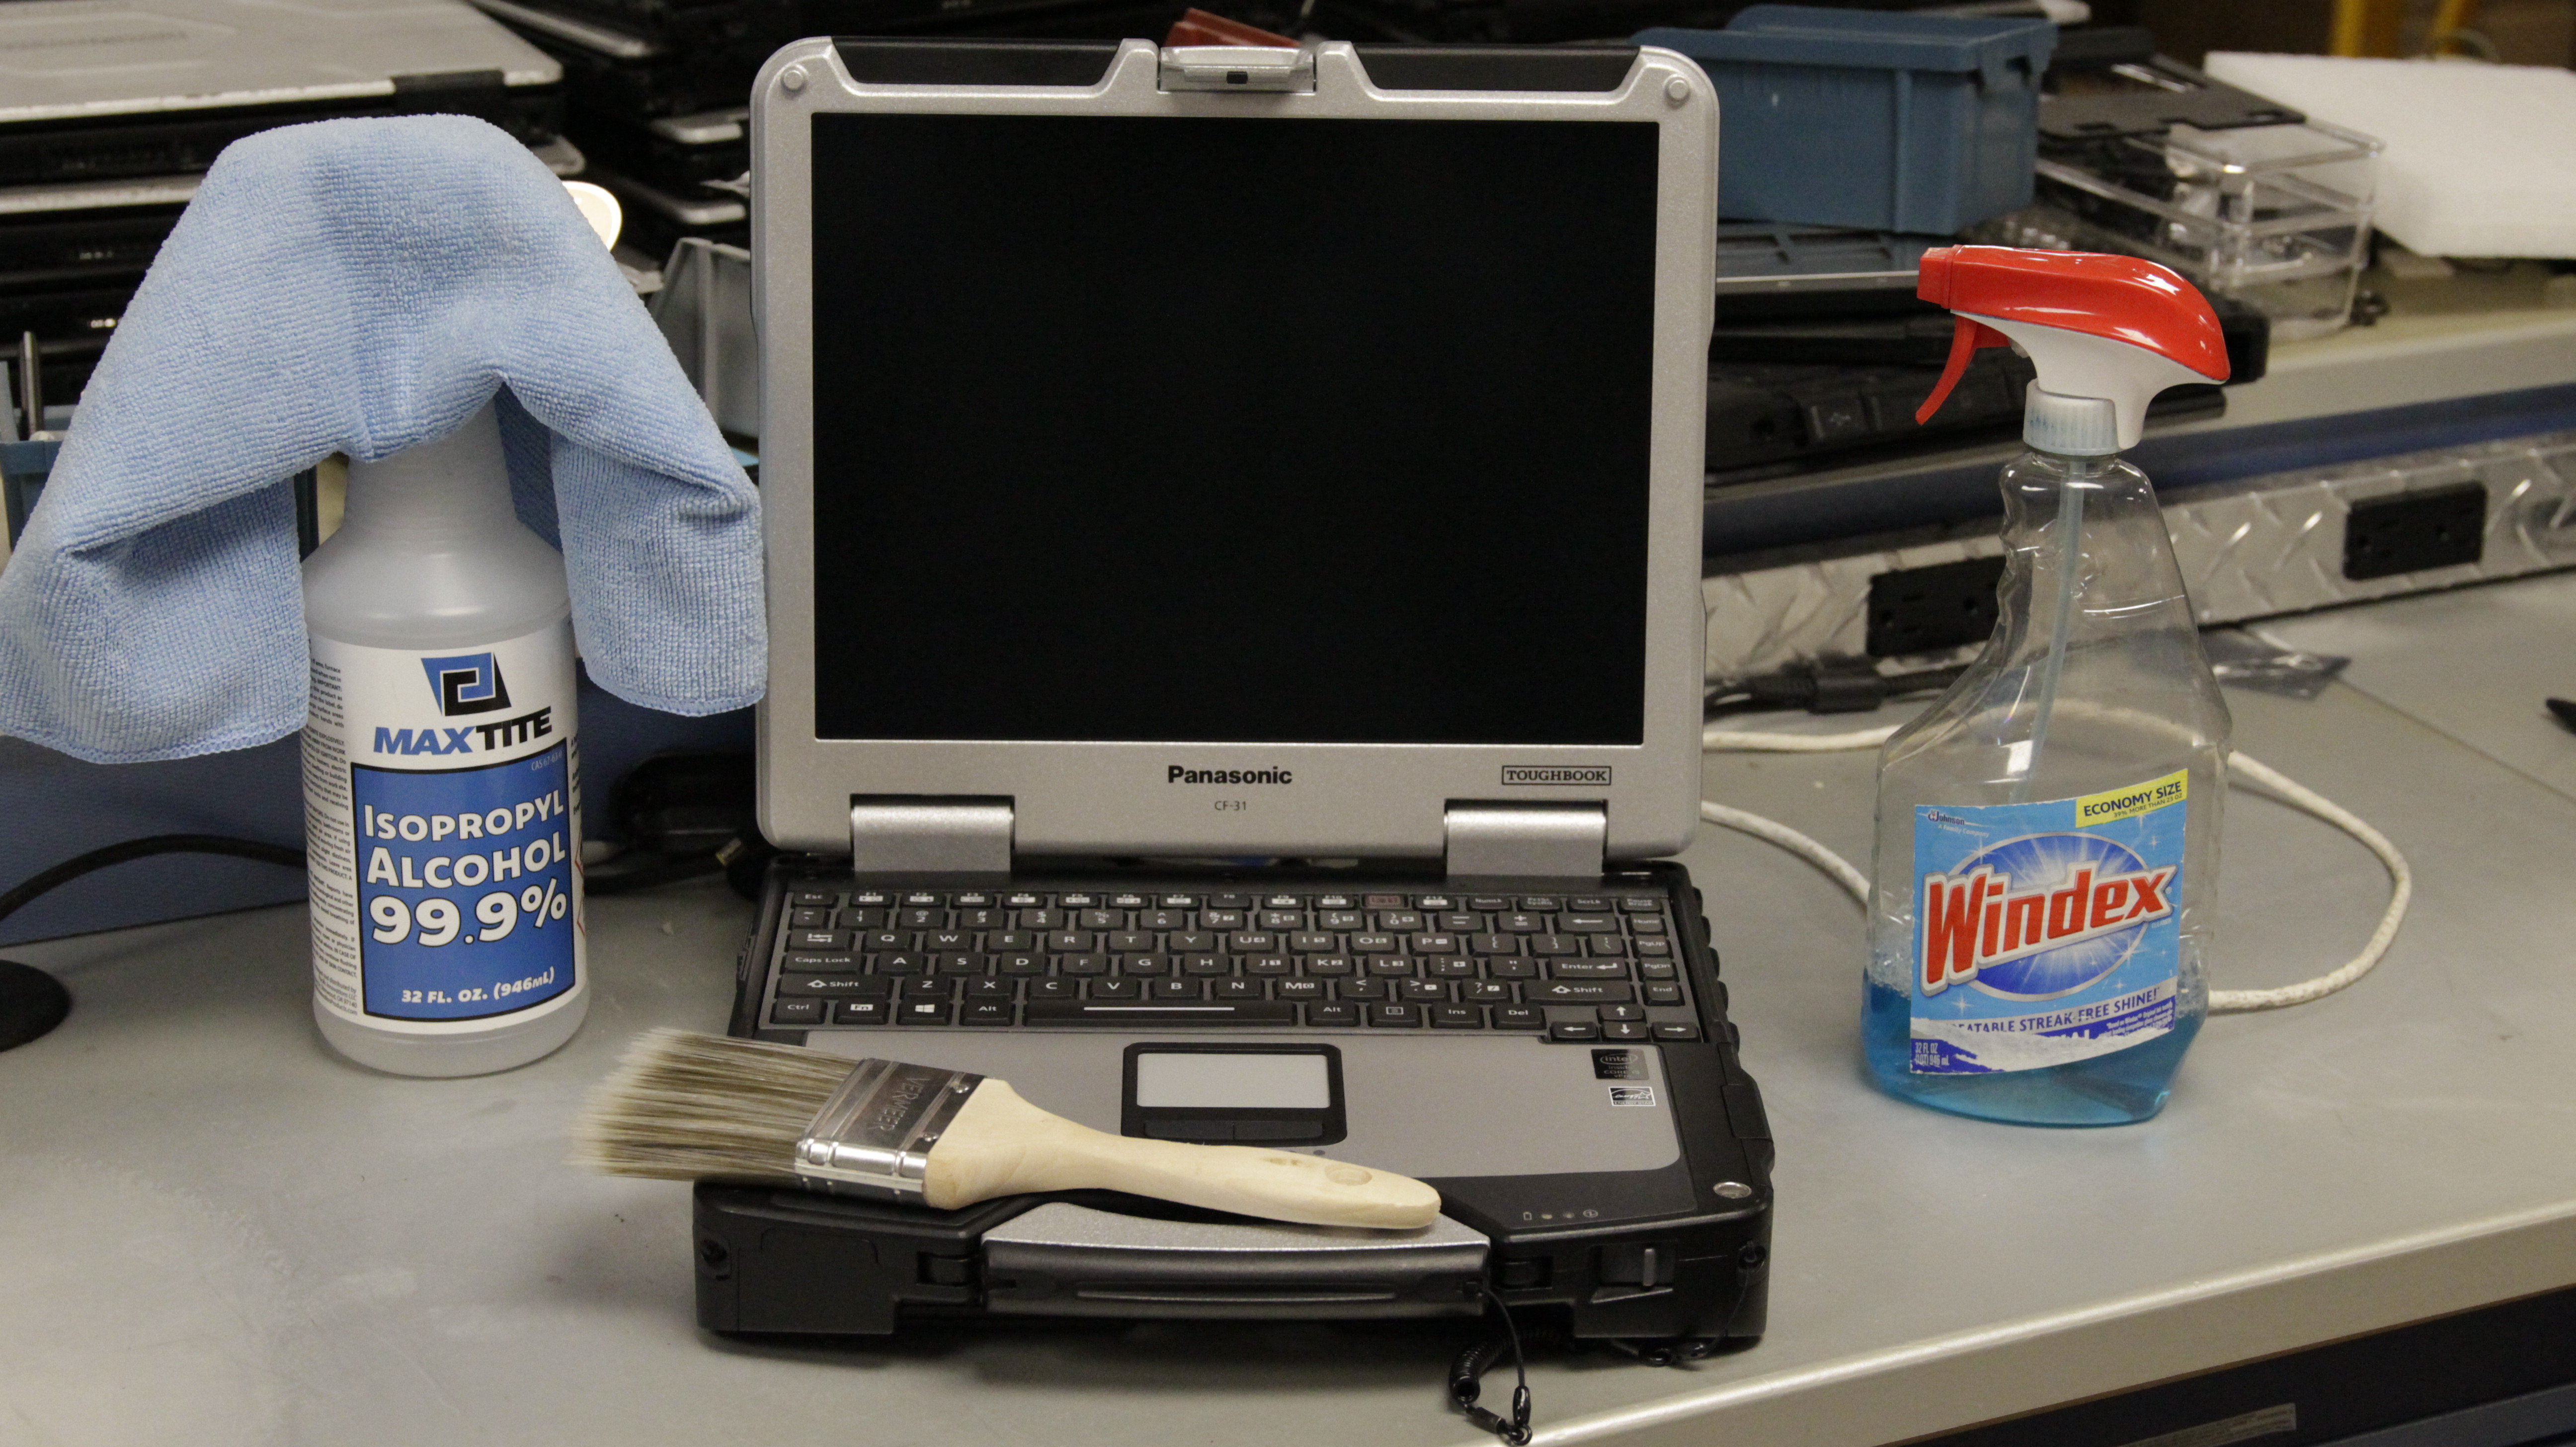 Some of the cleaning supplies used to clean our rugged laptops and tablets next to a Panasonic Toughbook CF-31